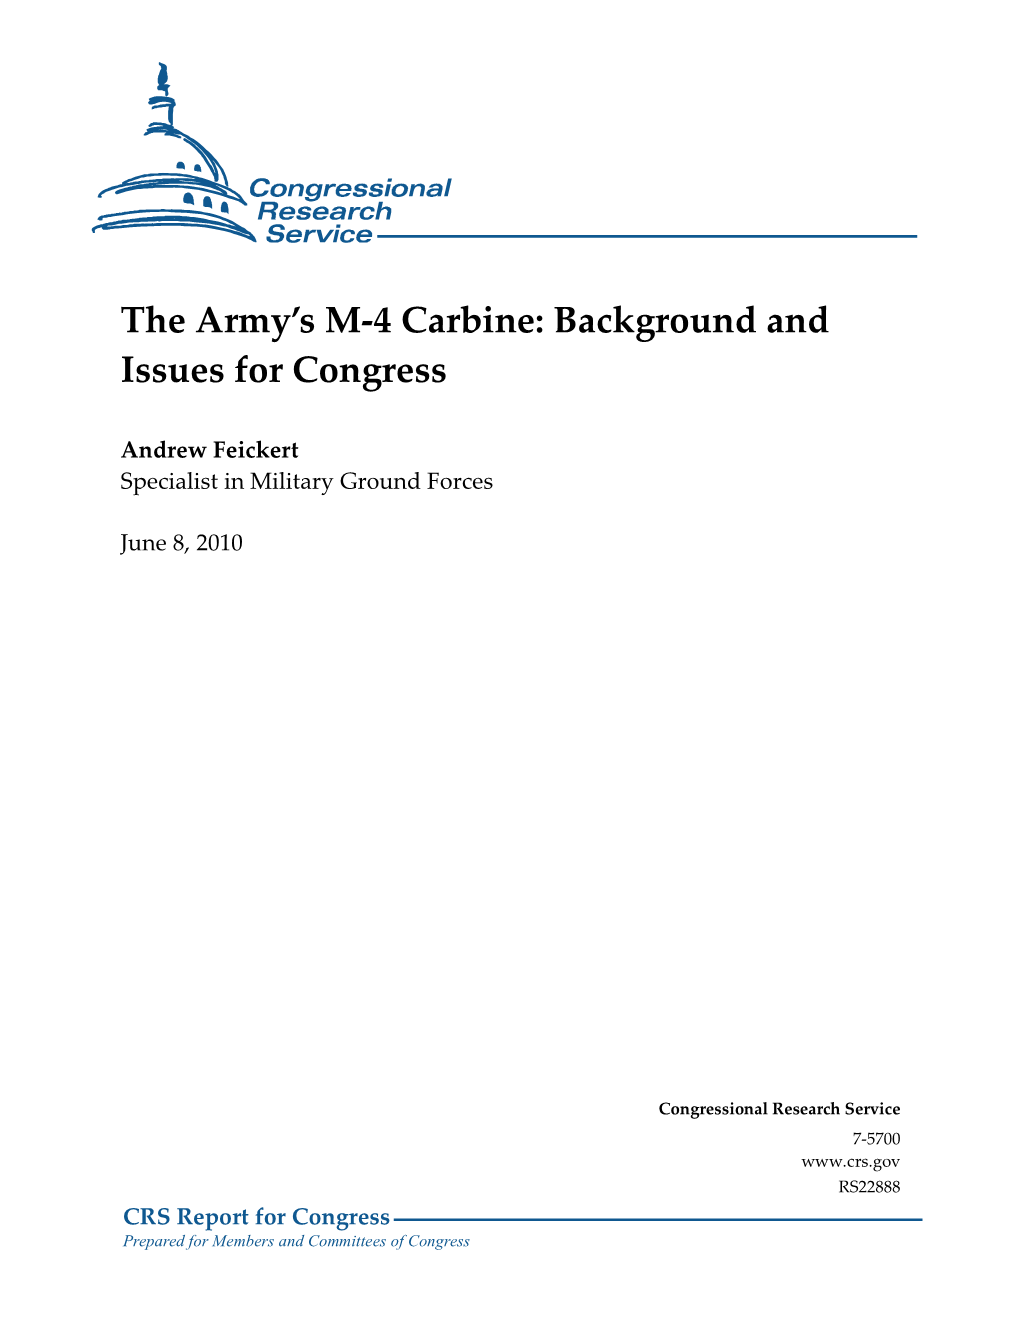 The Army's M-4 Carbine: Background and Issues for Congress